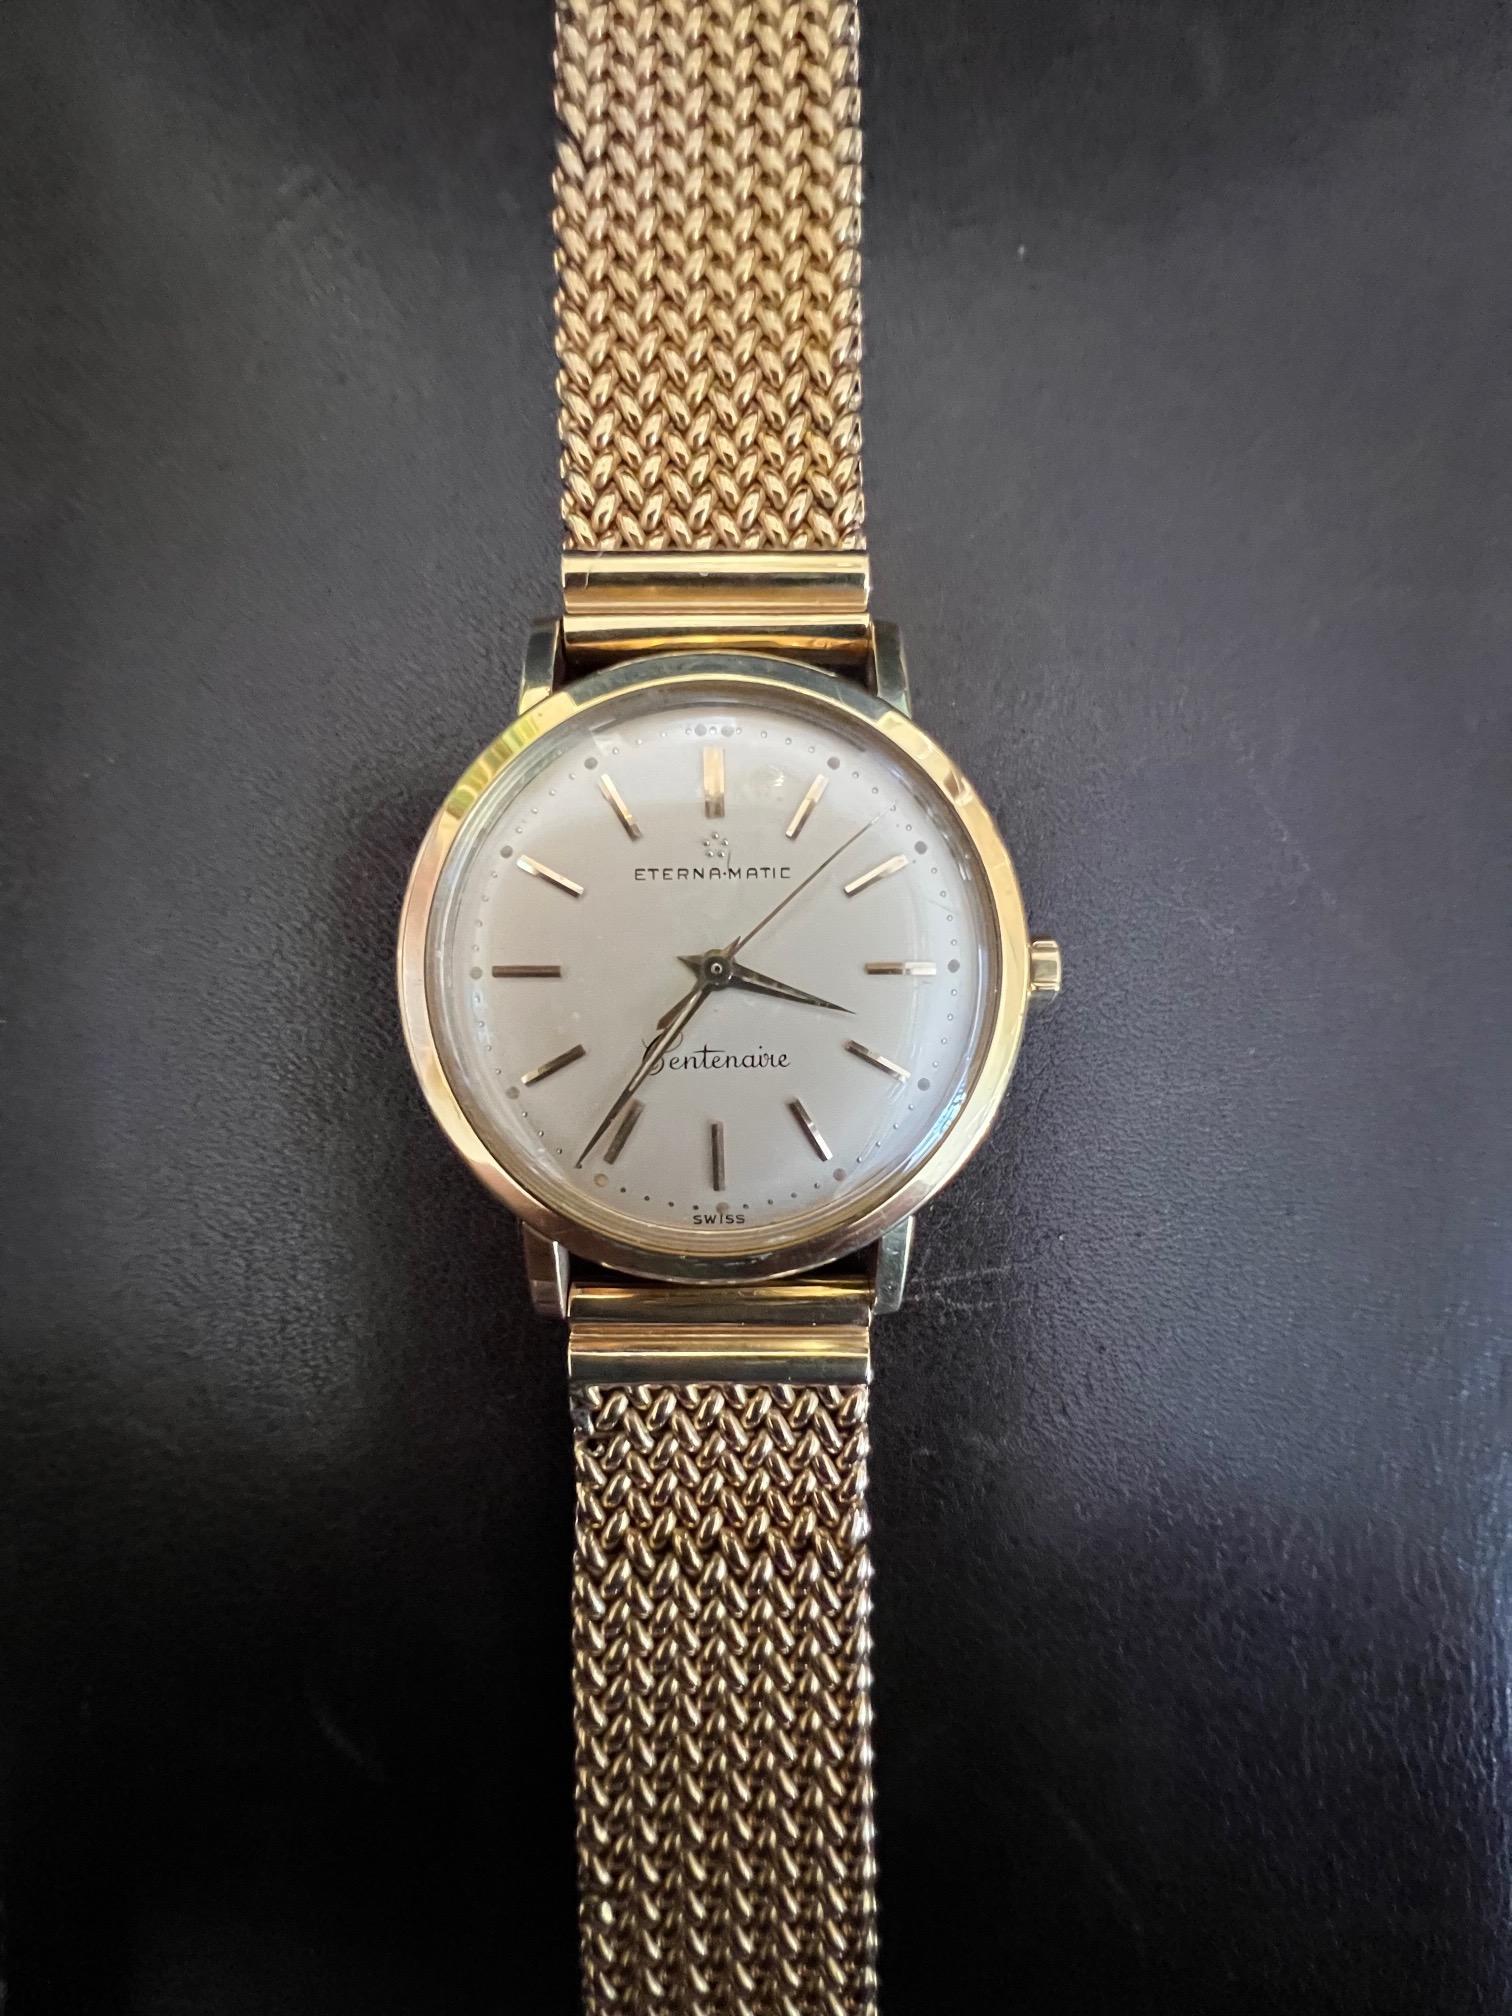 A beautiful and rare, time capsule Eterna 18k gold watch with matching 18k gold bracelet. Original box, hang tag, very good/excellent condition-unpolished, inside case free of jewelers marks or previous repairs. Total weight with bracelet is 68.8